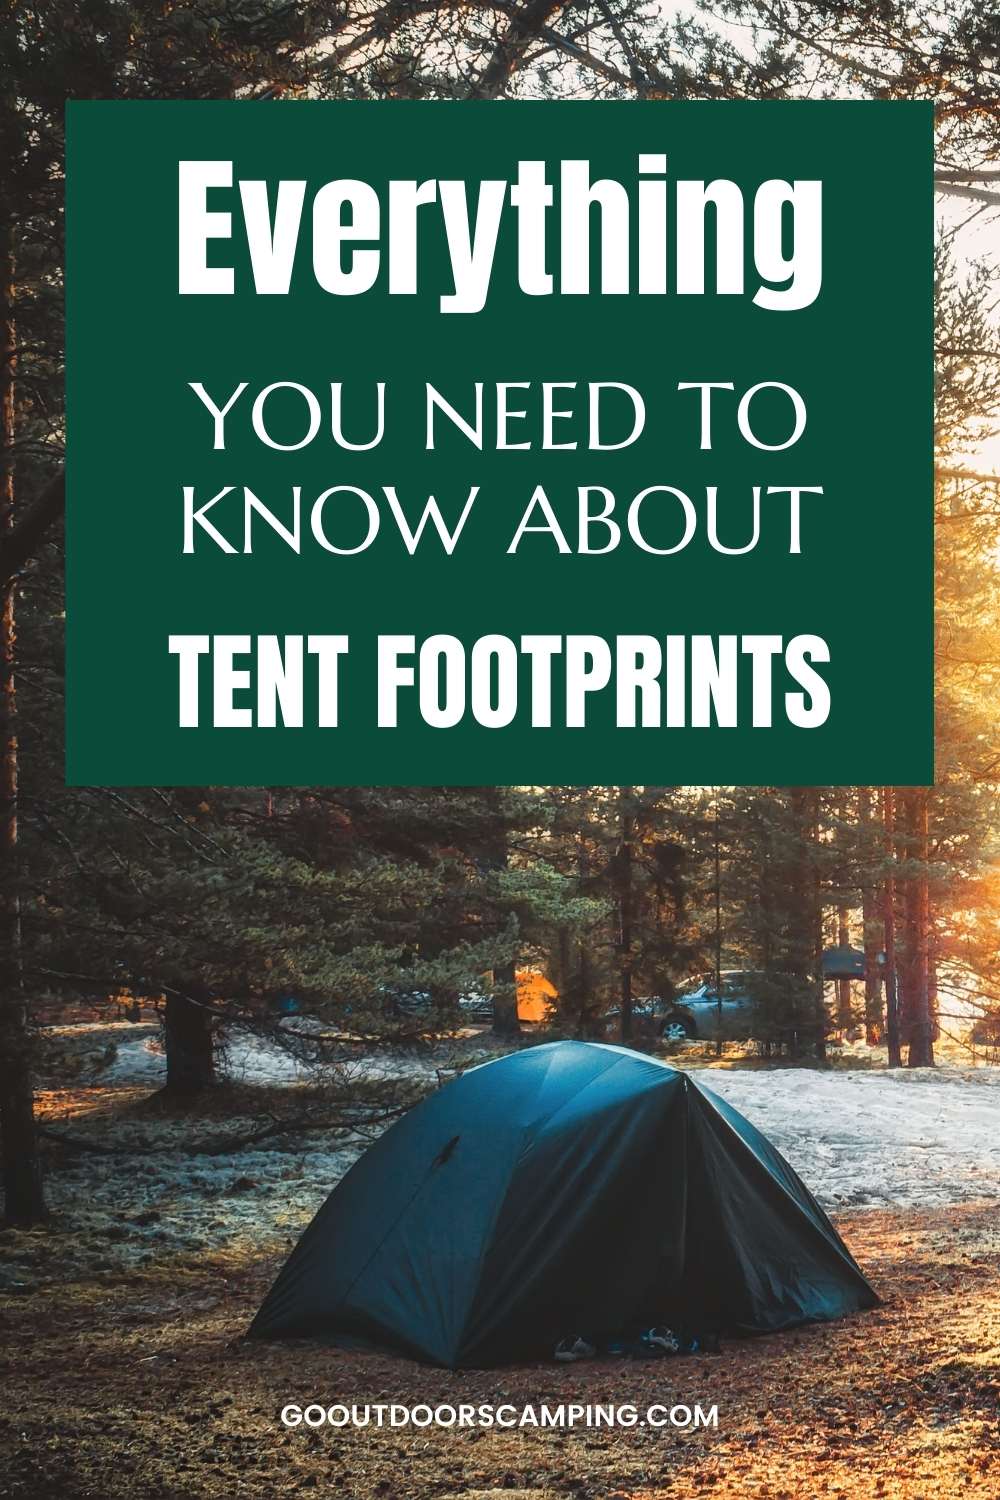 Everything you need to know about tent footprints